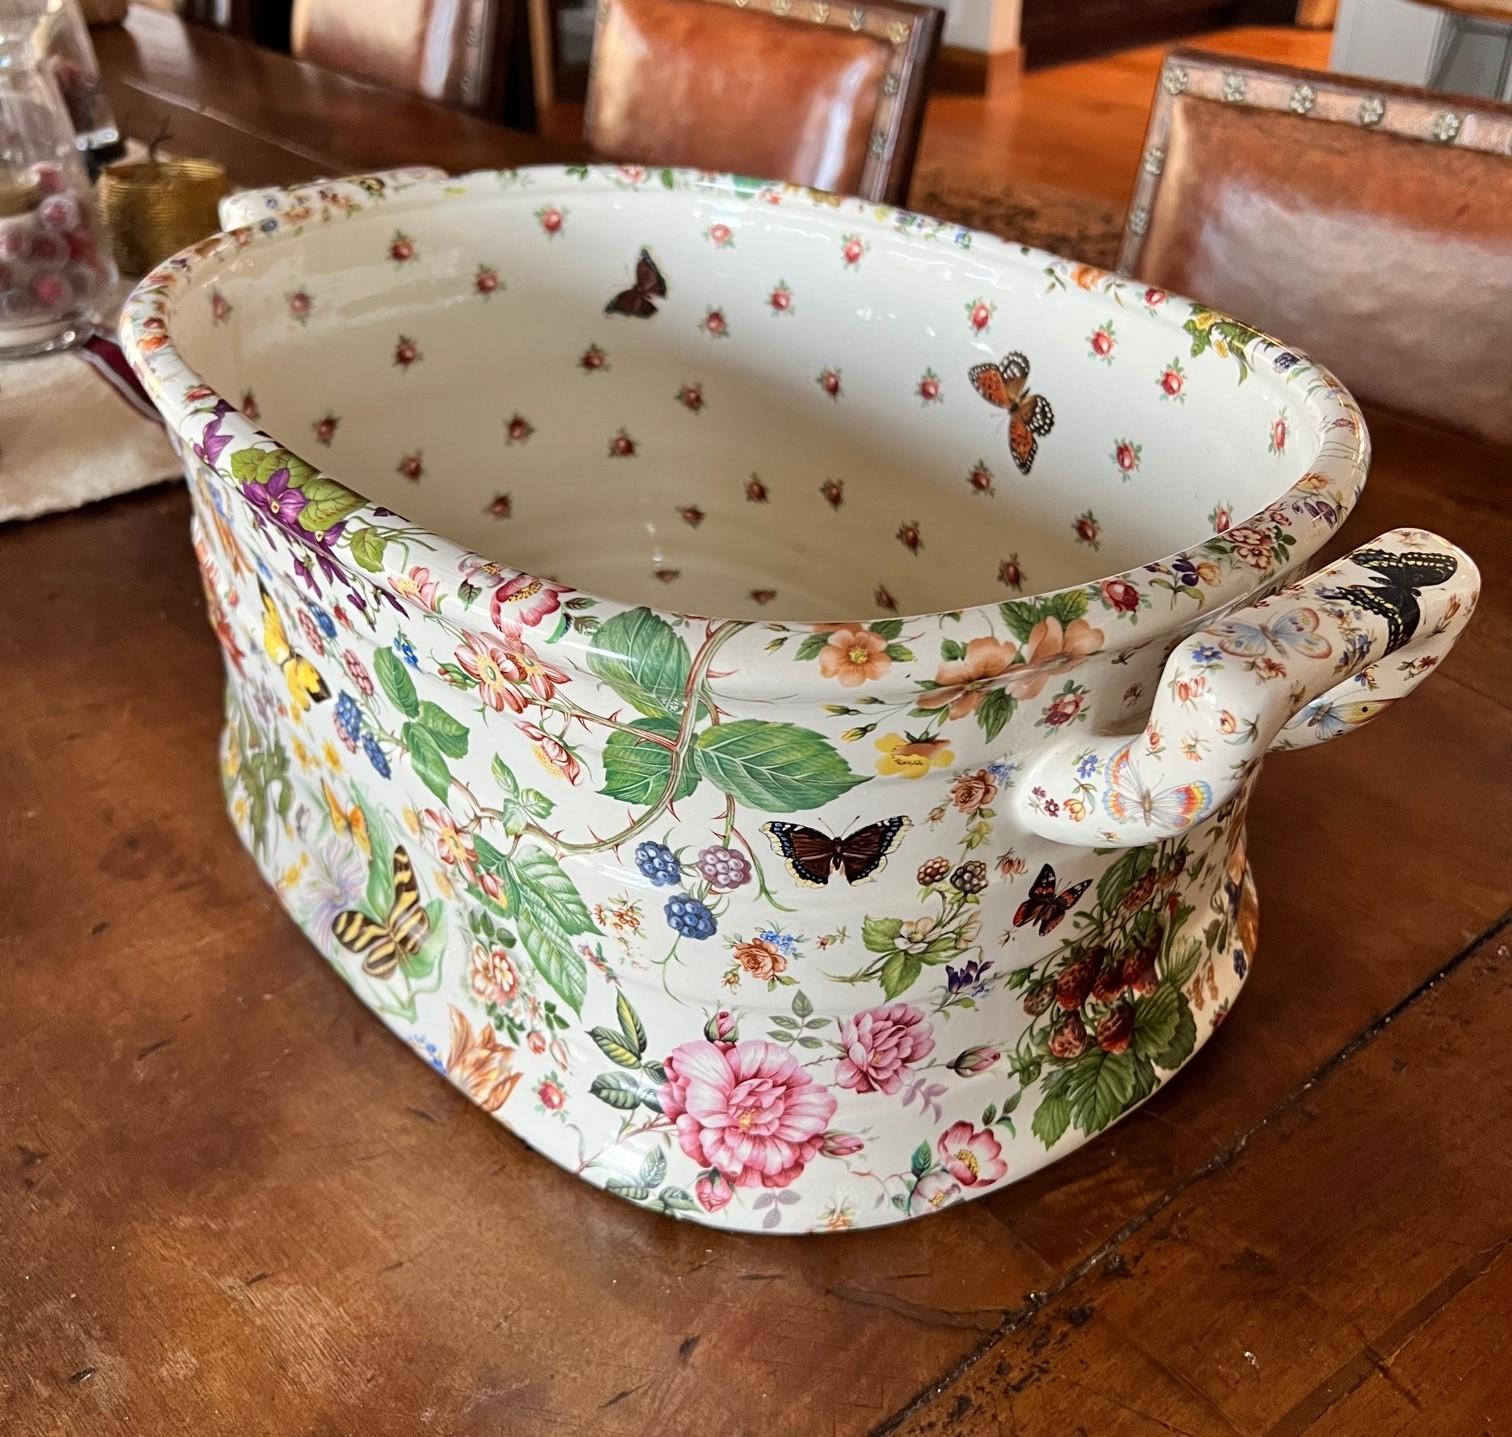 Porcelain foot bath extensively decorated with flora and fauna. The outside is decorated with strawberry plants, flowers, birds and butterflies. The inside is more sparsely decorated with butterflies along the sides and flowers on the base. The